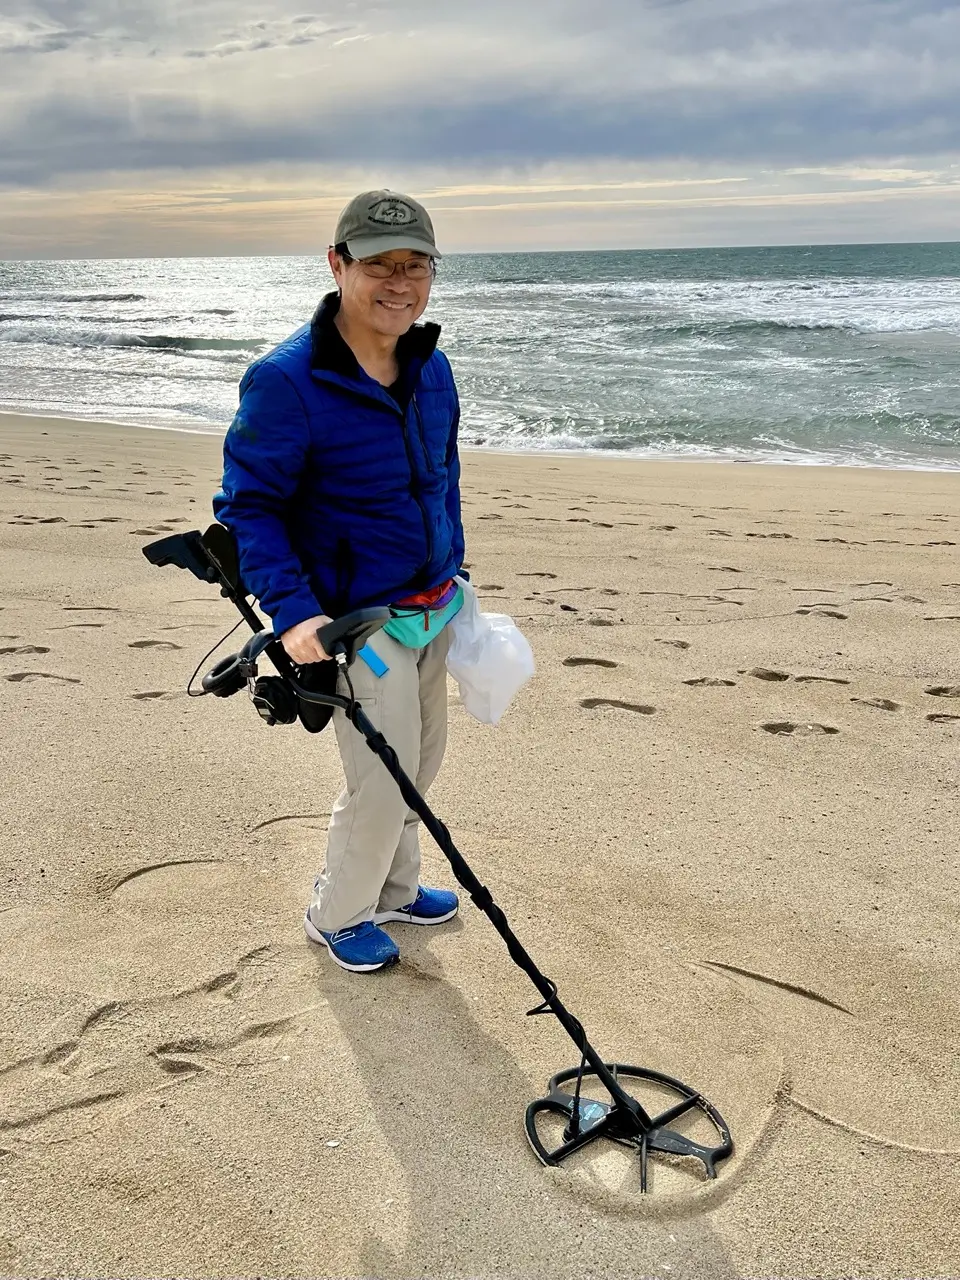 Metal detecting lesson student stands on a San Francisco Bay Area beach